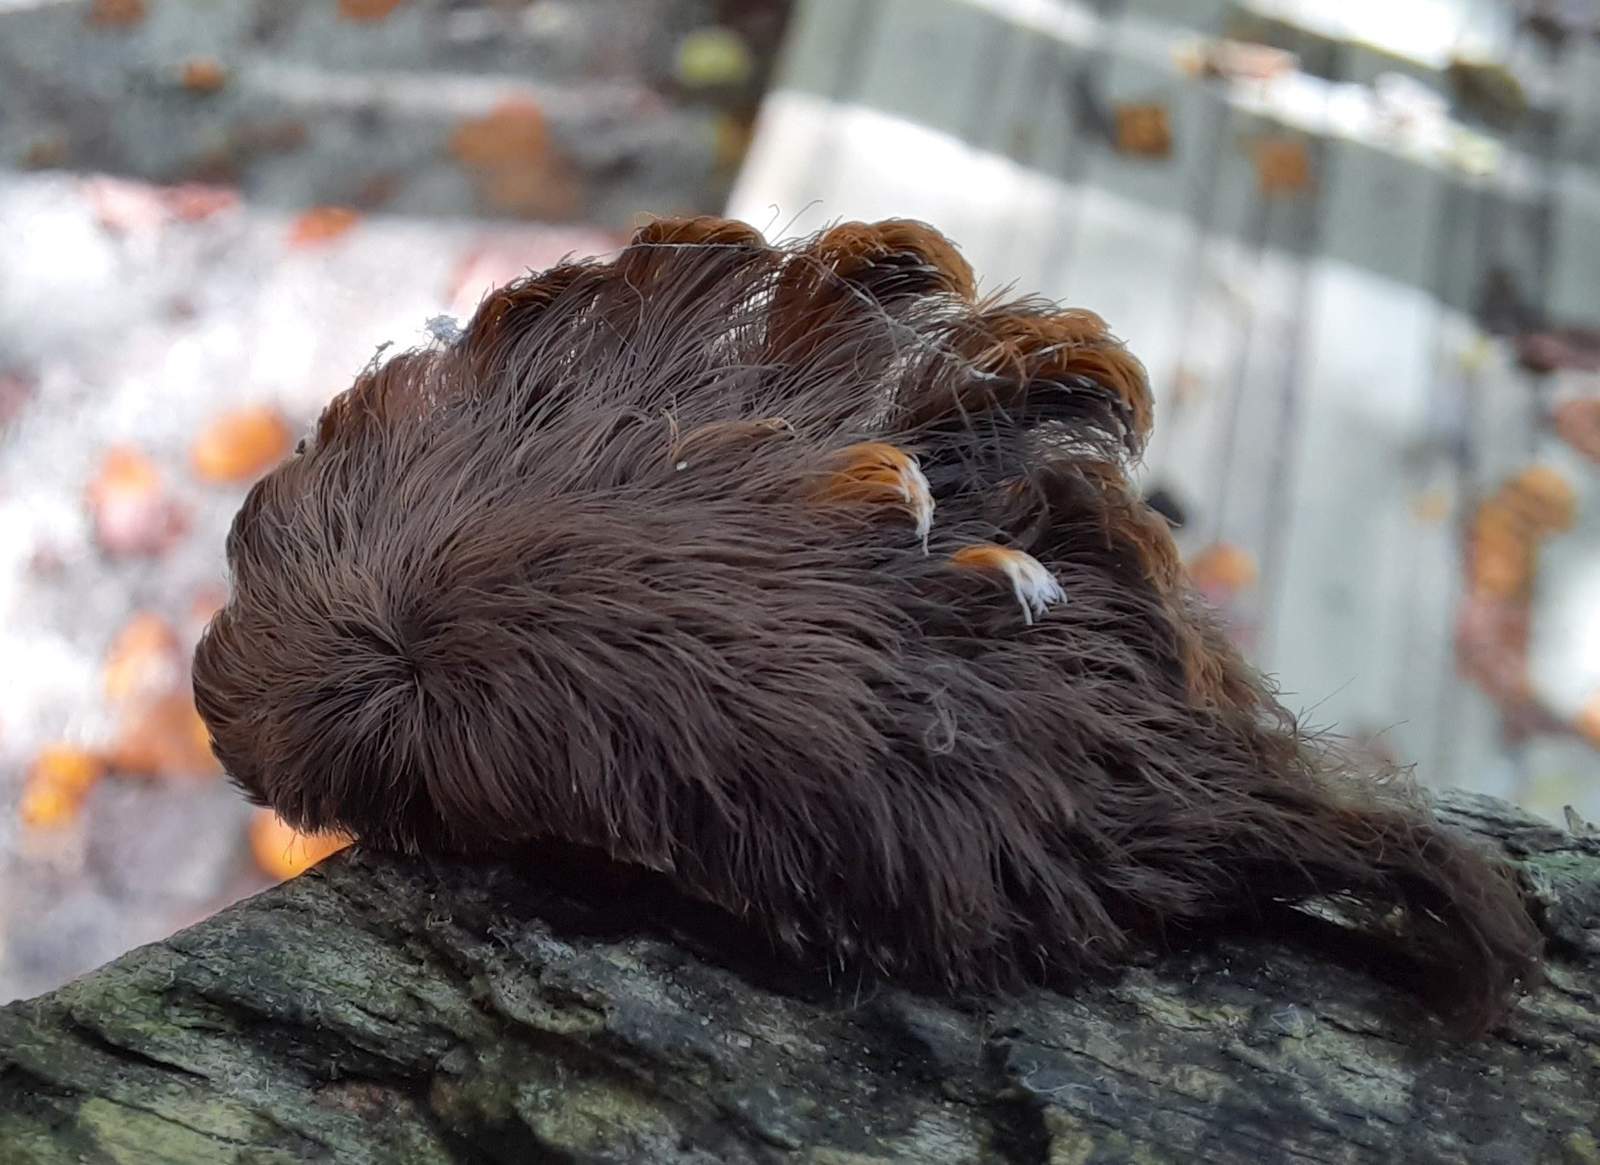 It may look like a lost wig, but this venomous caterpillar is in Virginia’s forests